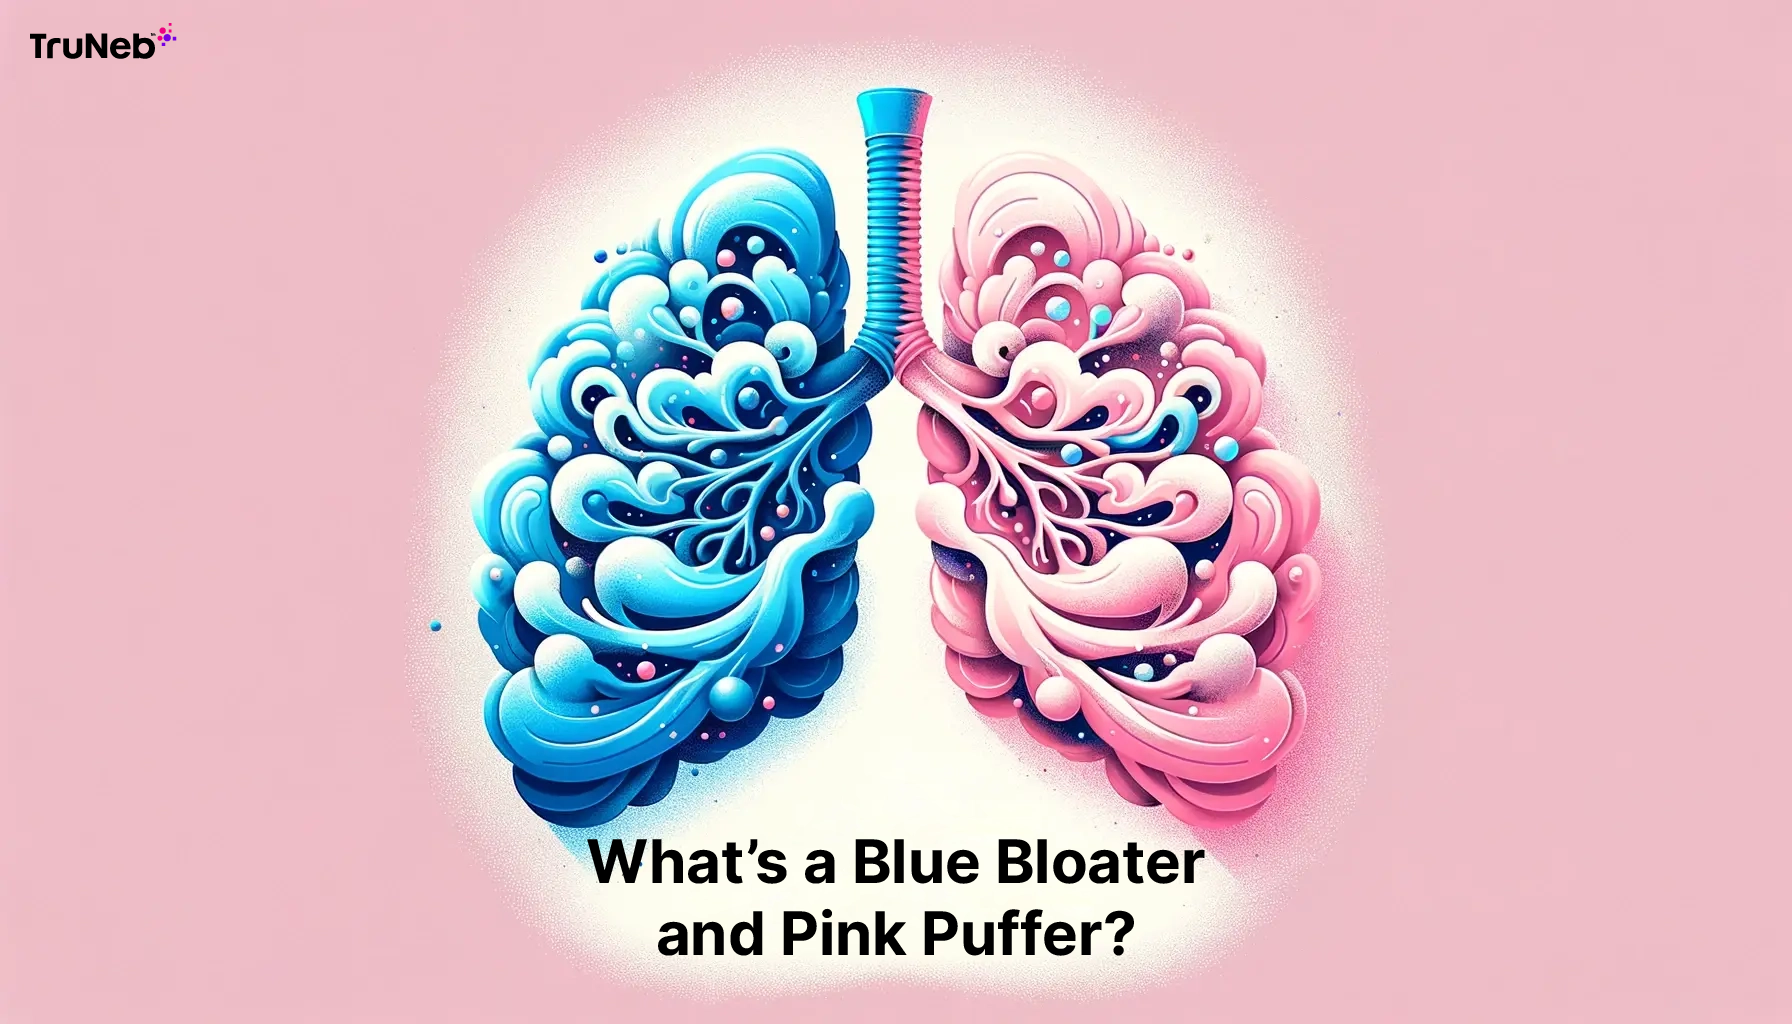 What’s a Blue Bloater and Pink Puffer?